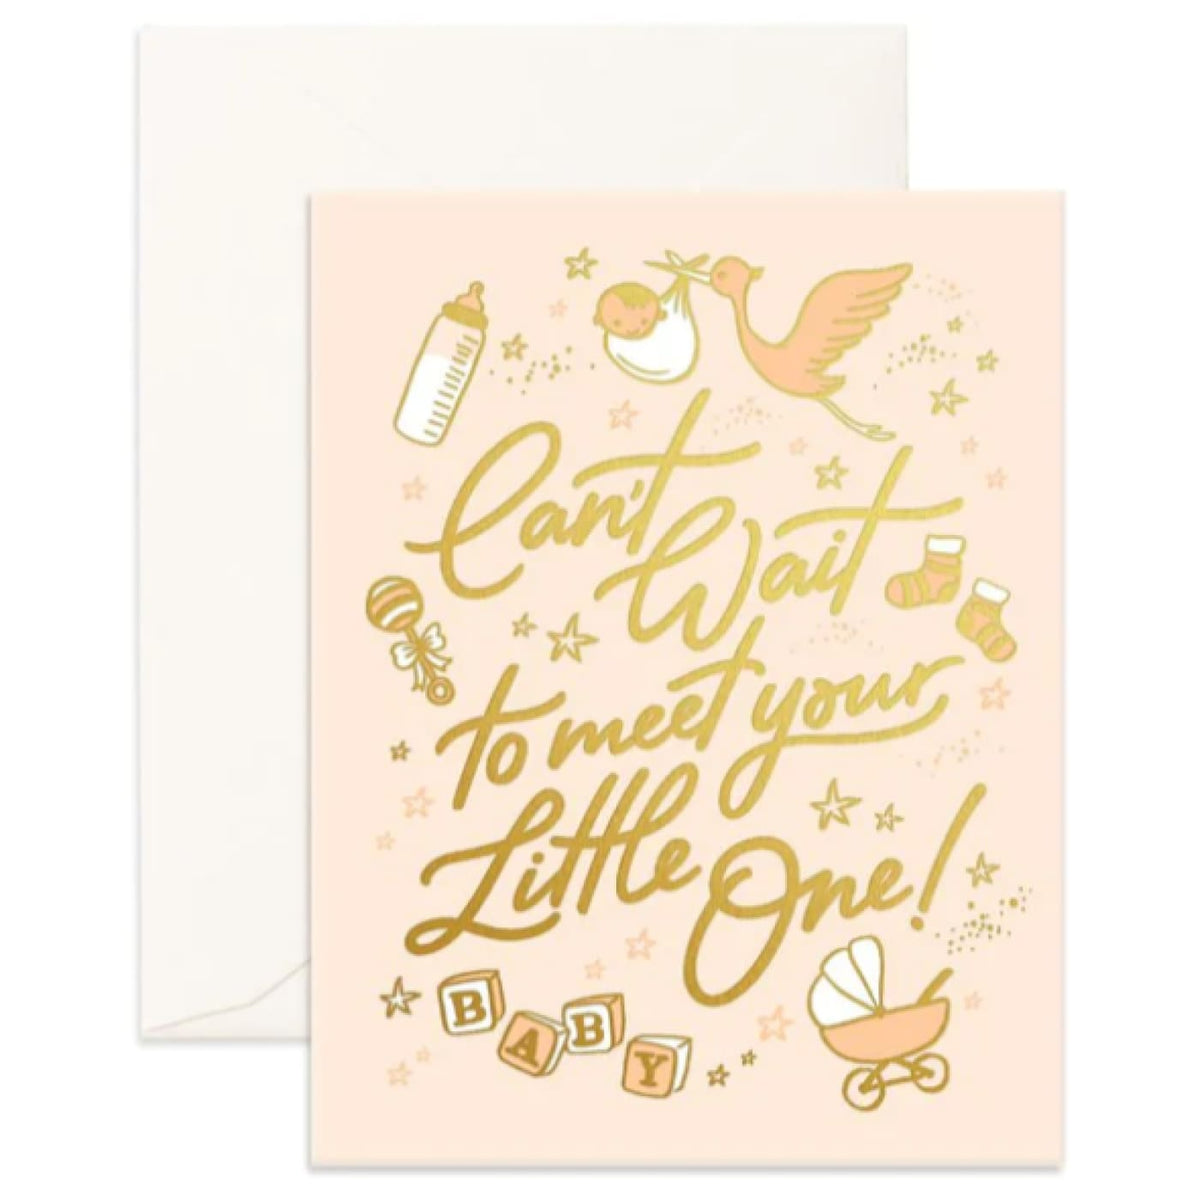 Fox &amp; Fallow Meet Little One Greeting Card - GIFTWARE - CARDS